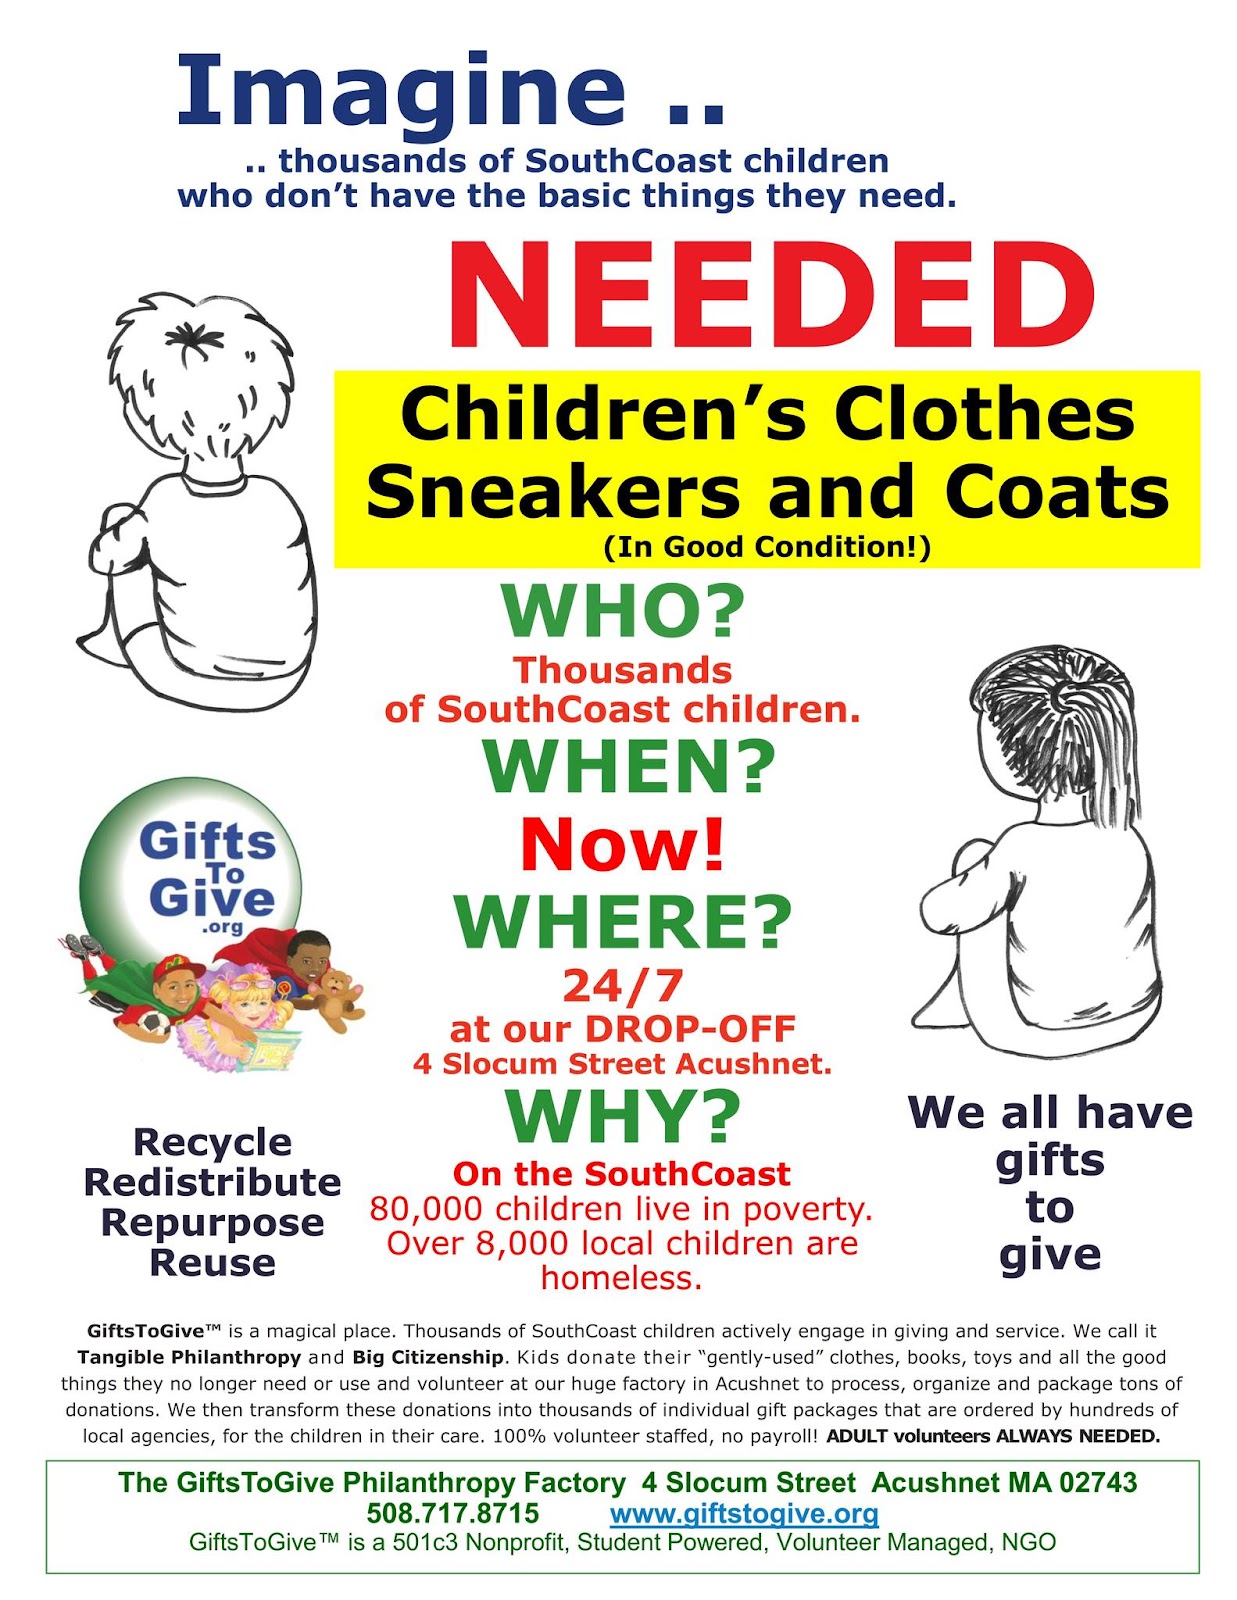 No Imagine.... thousand of SouthCoast children who don't hav ethe basic things they need. Needed Children's clothes sneakers and coats, (in good condition) Who? thousand of SouthCoast children When? now! Wher? 27/7 at our drop-off 4 Slocum Street Acushnet Why? on the southcoast 80,000 children live in poverty. Over 8000 local children are homeless. The Gifts to Give Philanthropy Factory